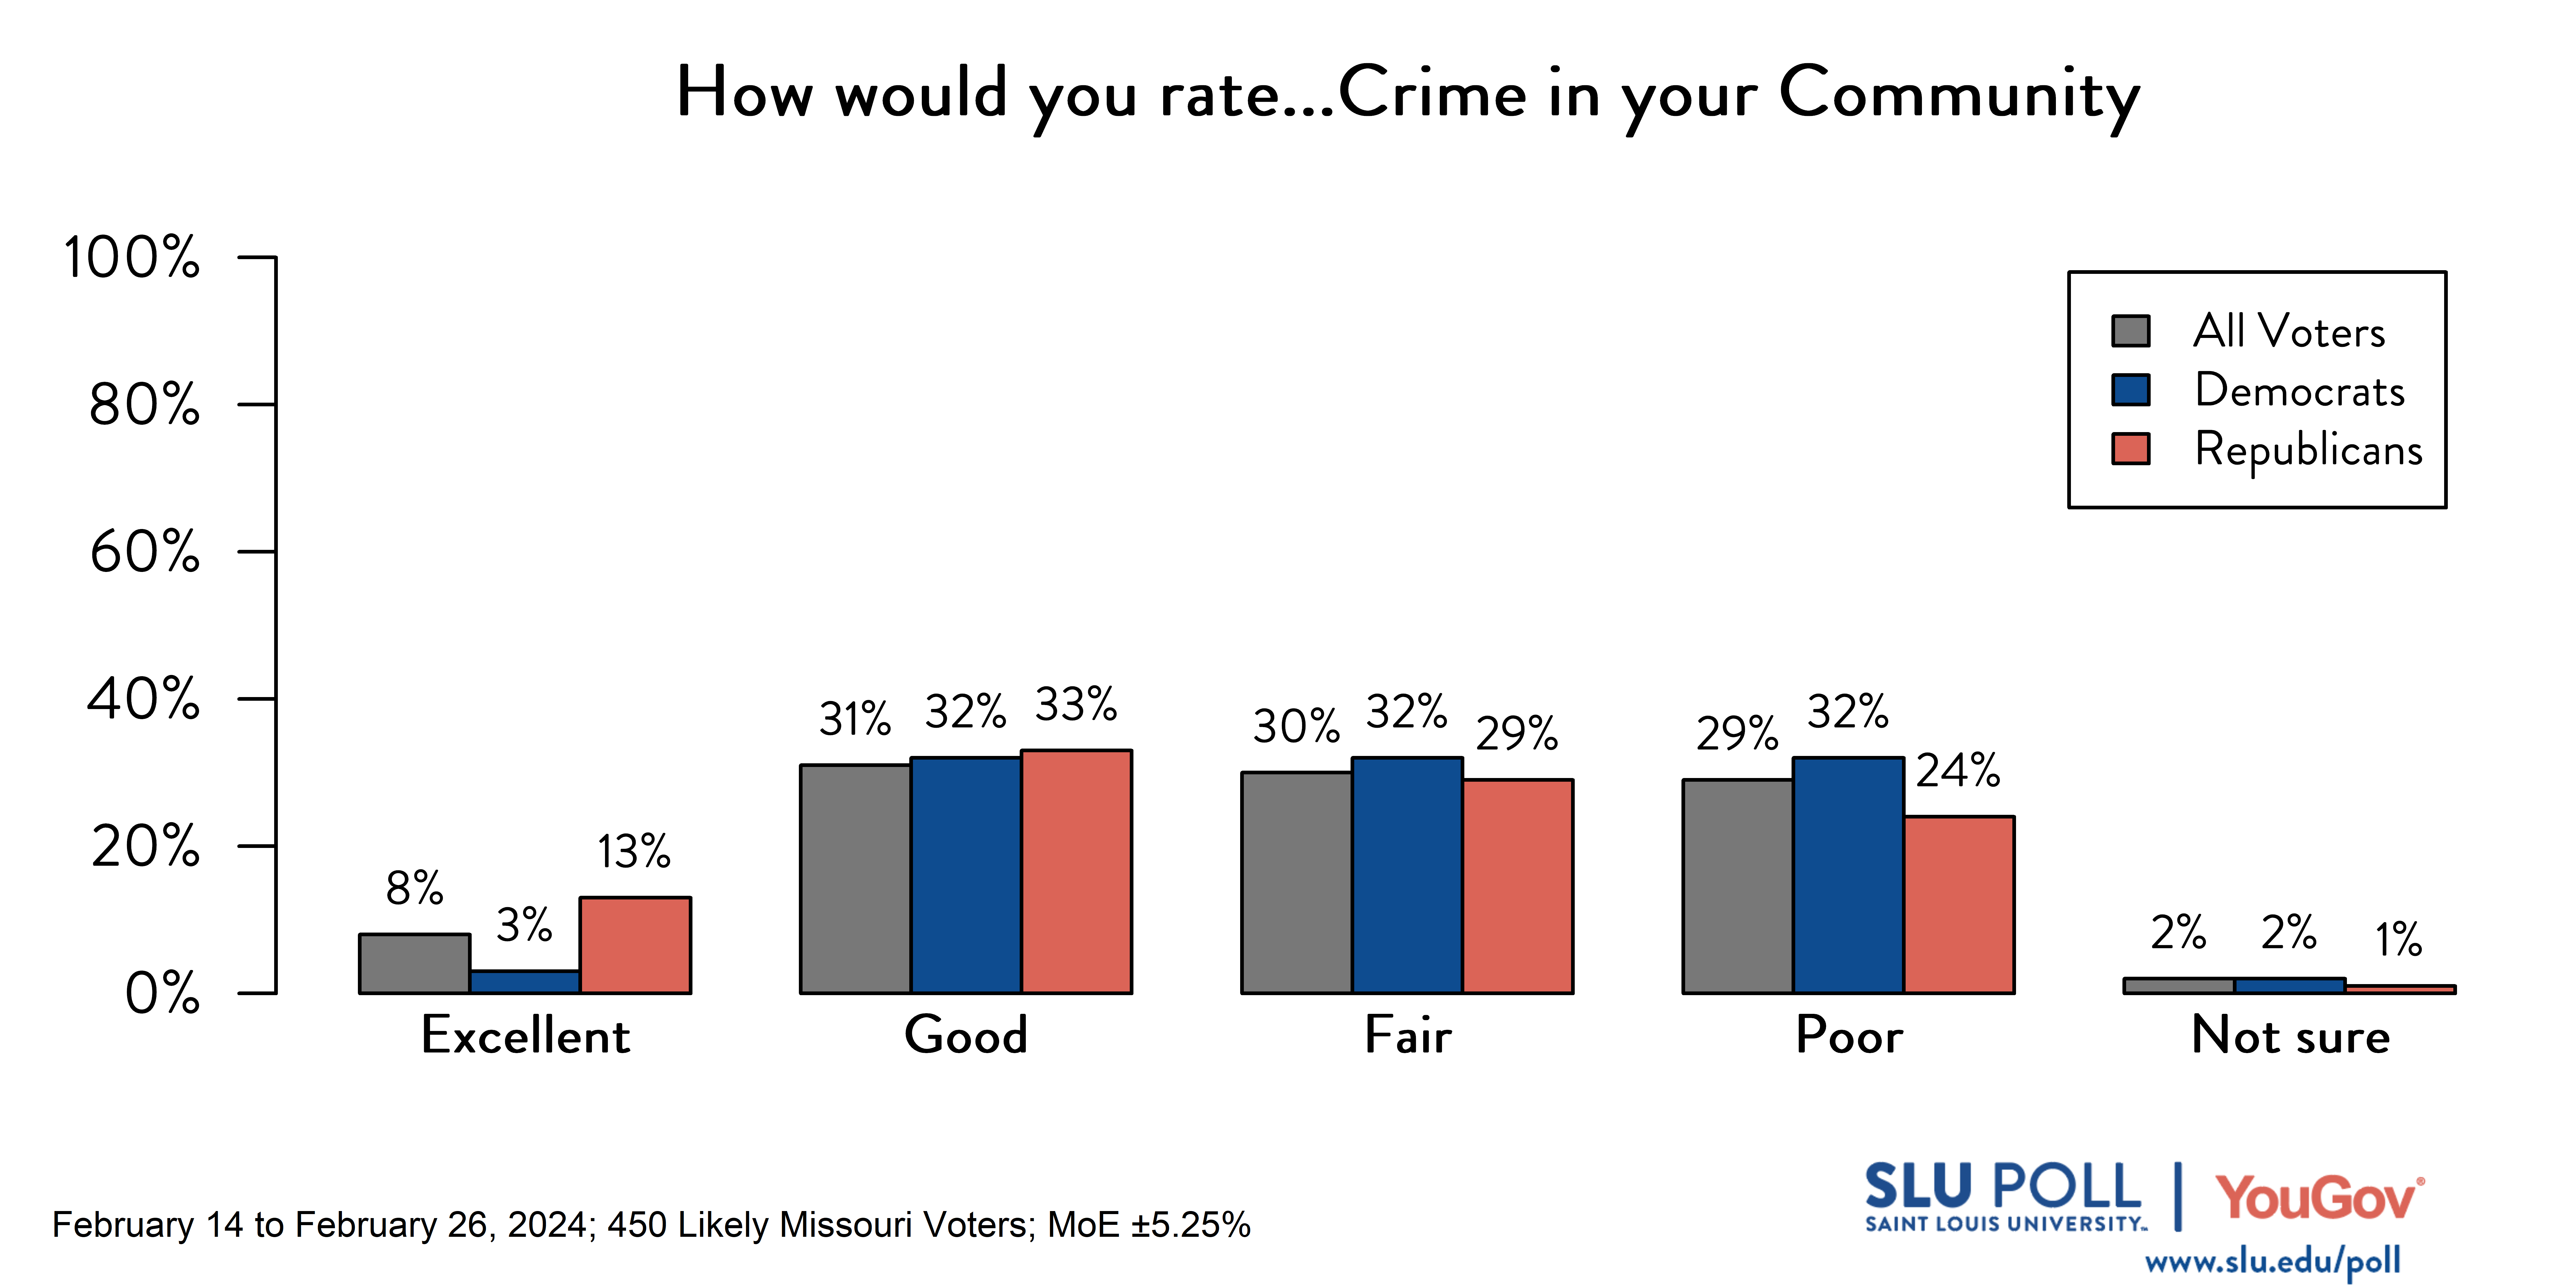 Bar Graph of SLU/YouGov Poll results rating crime community question. Results in caption.